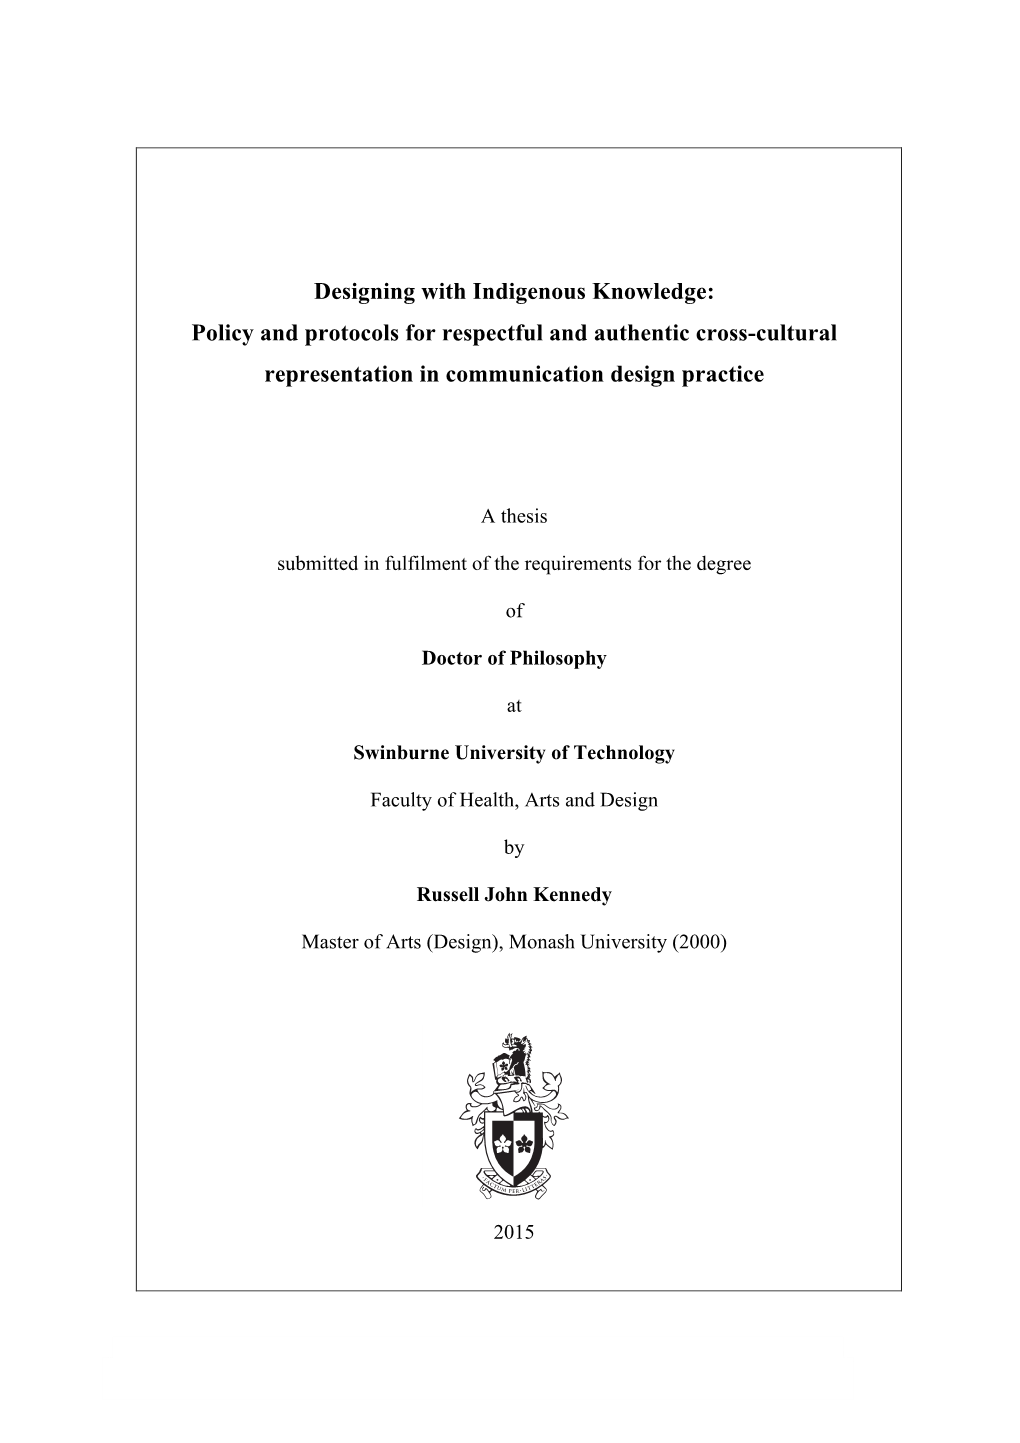 Designing with Indigenous Knowledge: Policy and Protocols for Respectful and Authentic Cross-Cultural Representation in Communication Design Practice